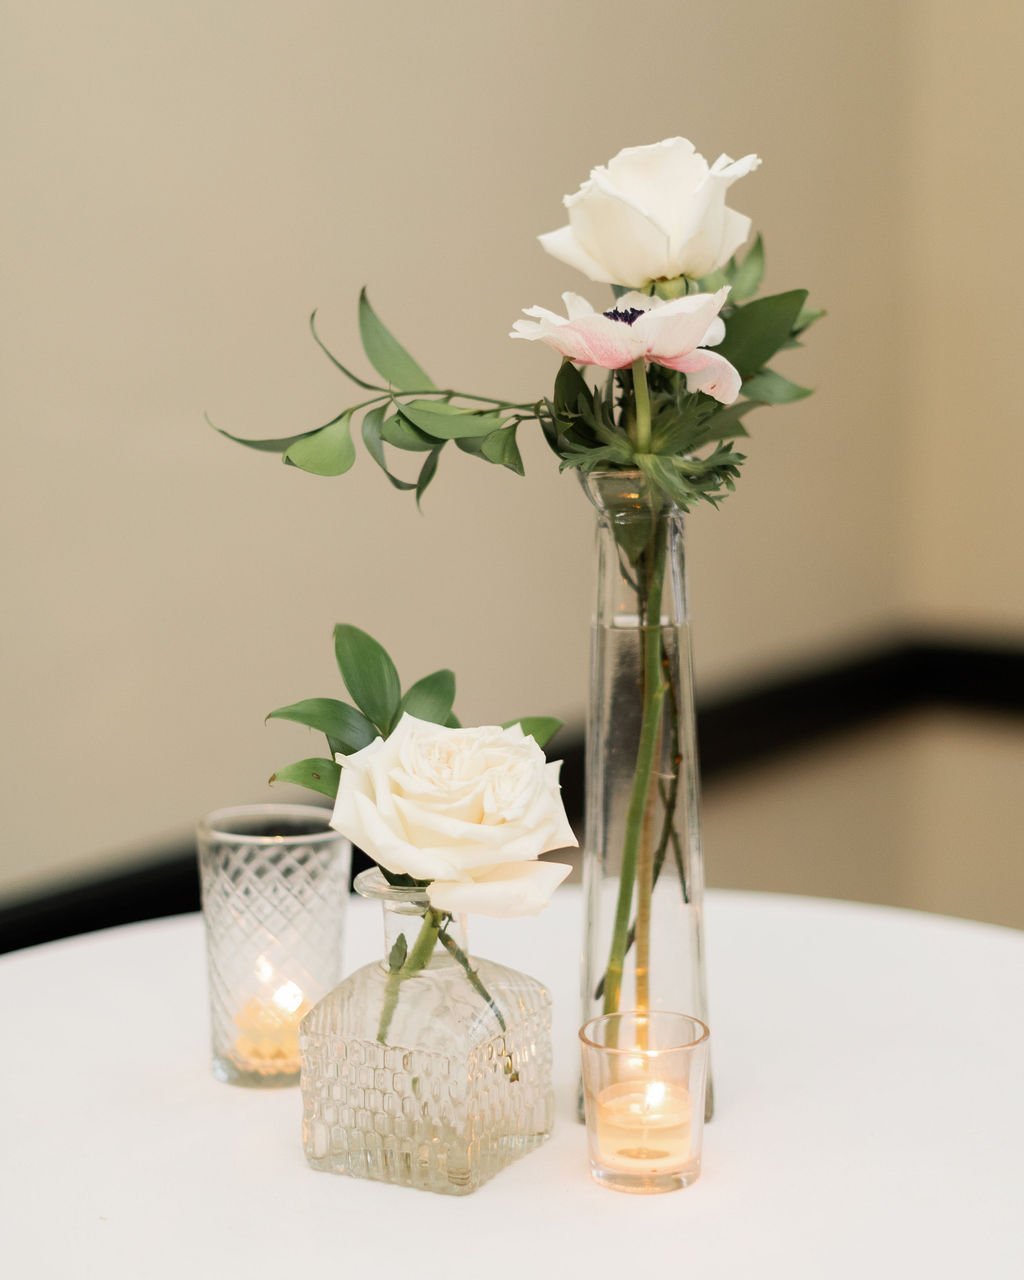 Rachel-and-matthews-elegant-savannah-wedding-at-whitefield-chapel-and-vics-on-the-river-featuring-ivory-and-beau-florals-planned-by-savannah-wedding-planner-ivory-and-beau-savannah-florist-savannah-wedding-florist-savannah-wedding-36.jpg